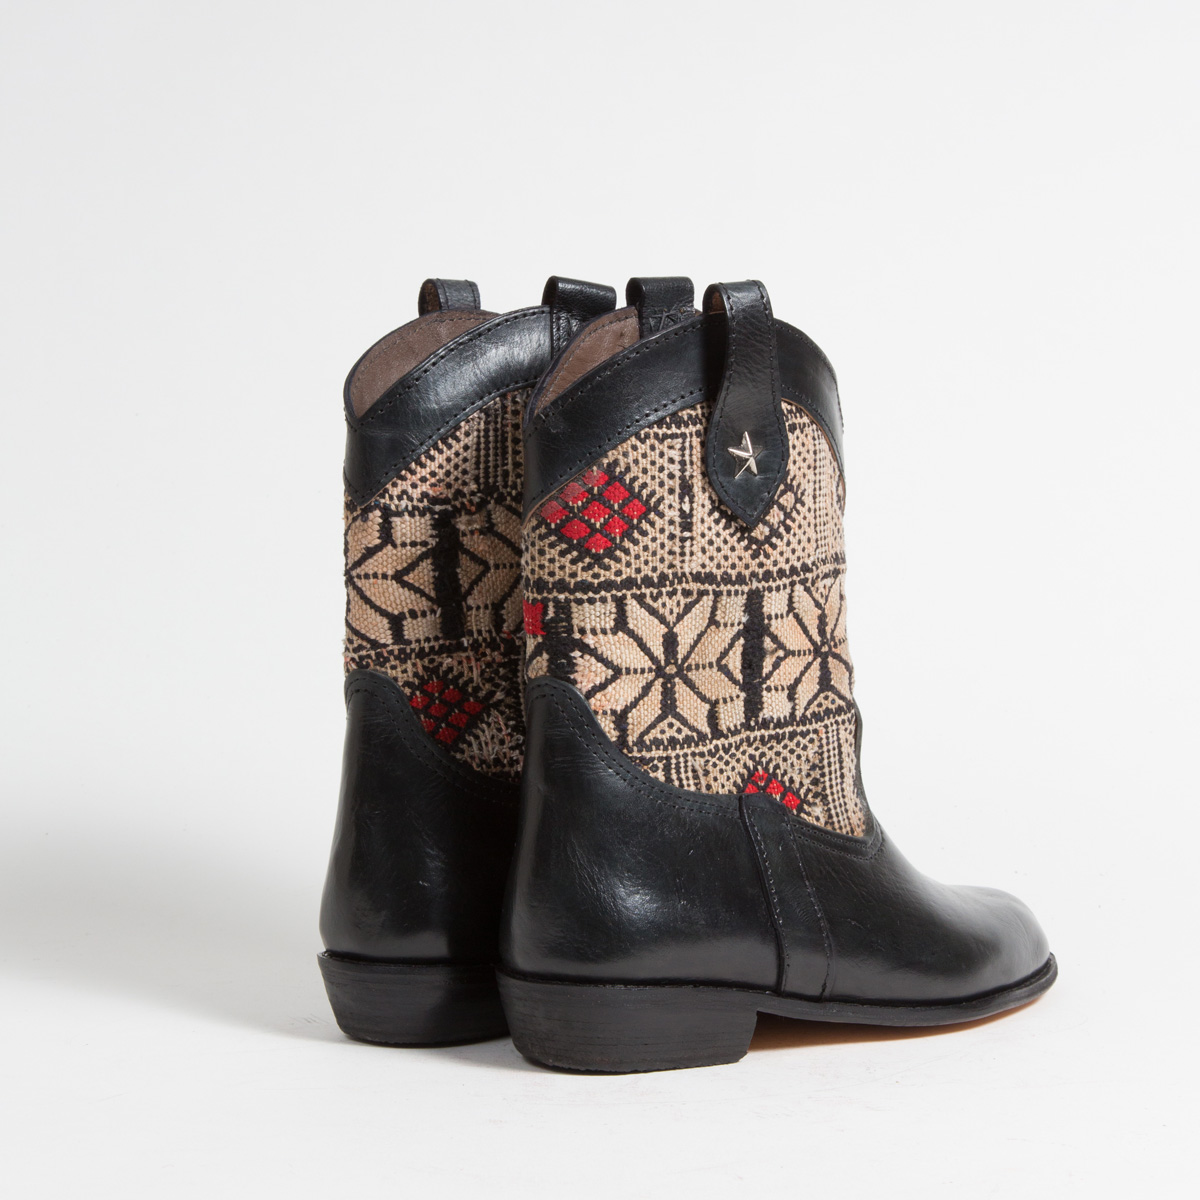 Bottines Kilim cuir mababouche artisanales (Réf. MN9-39)